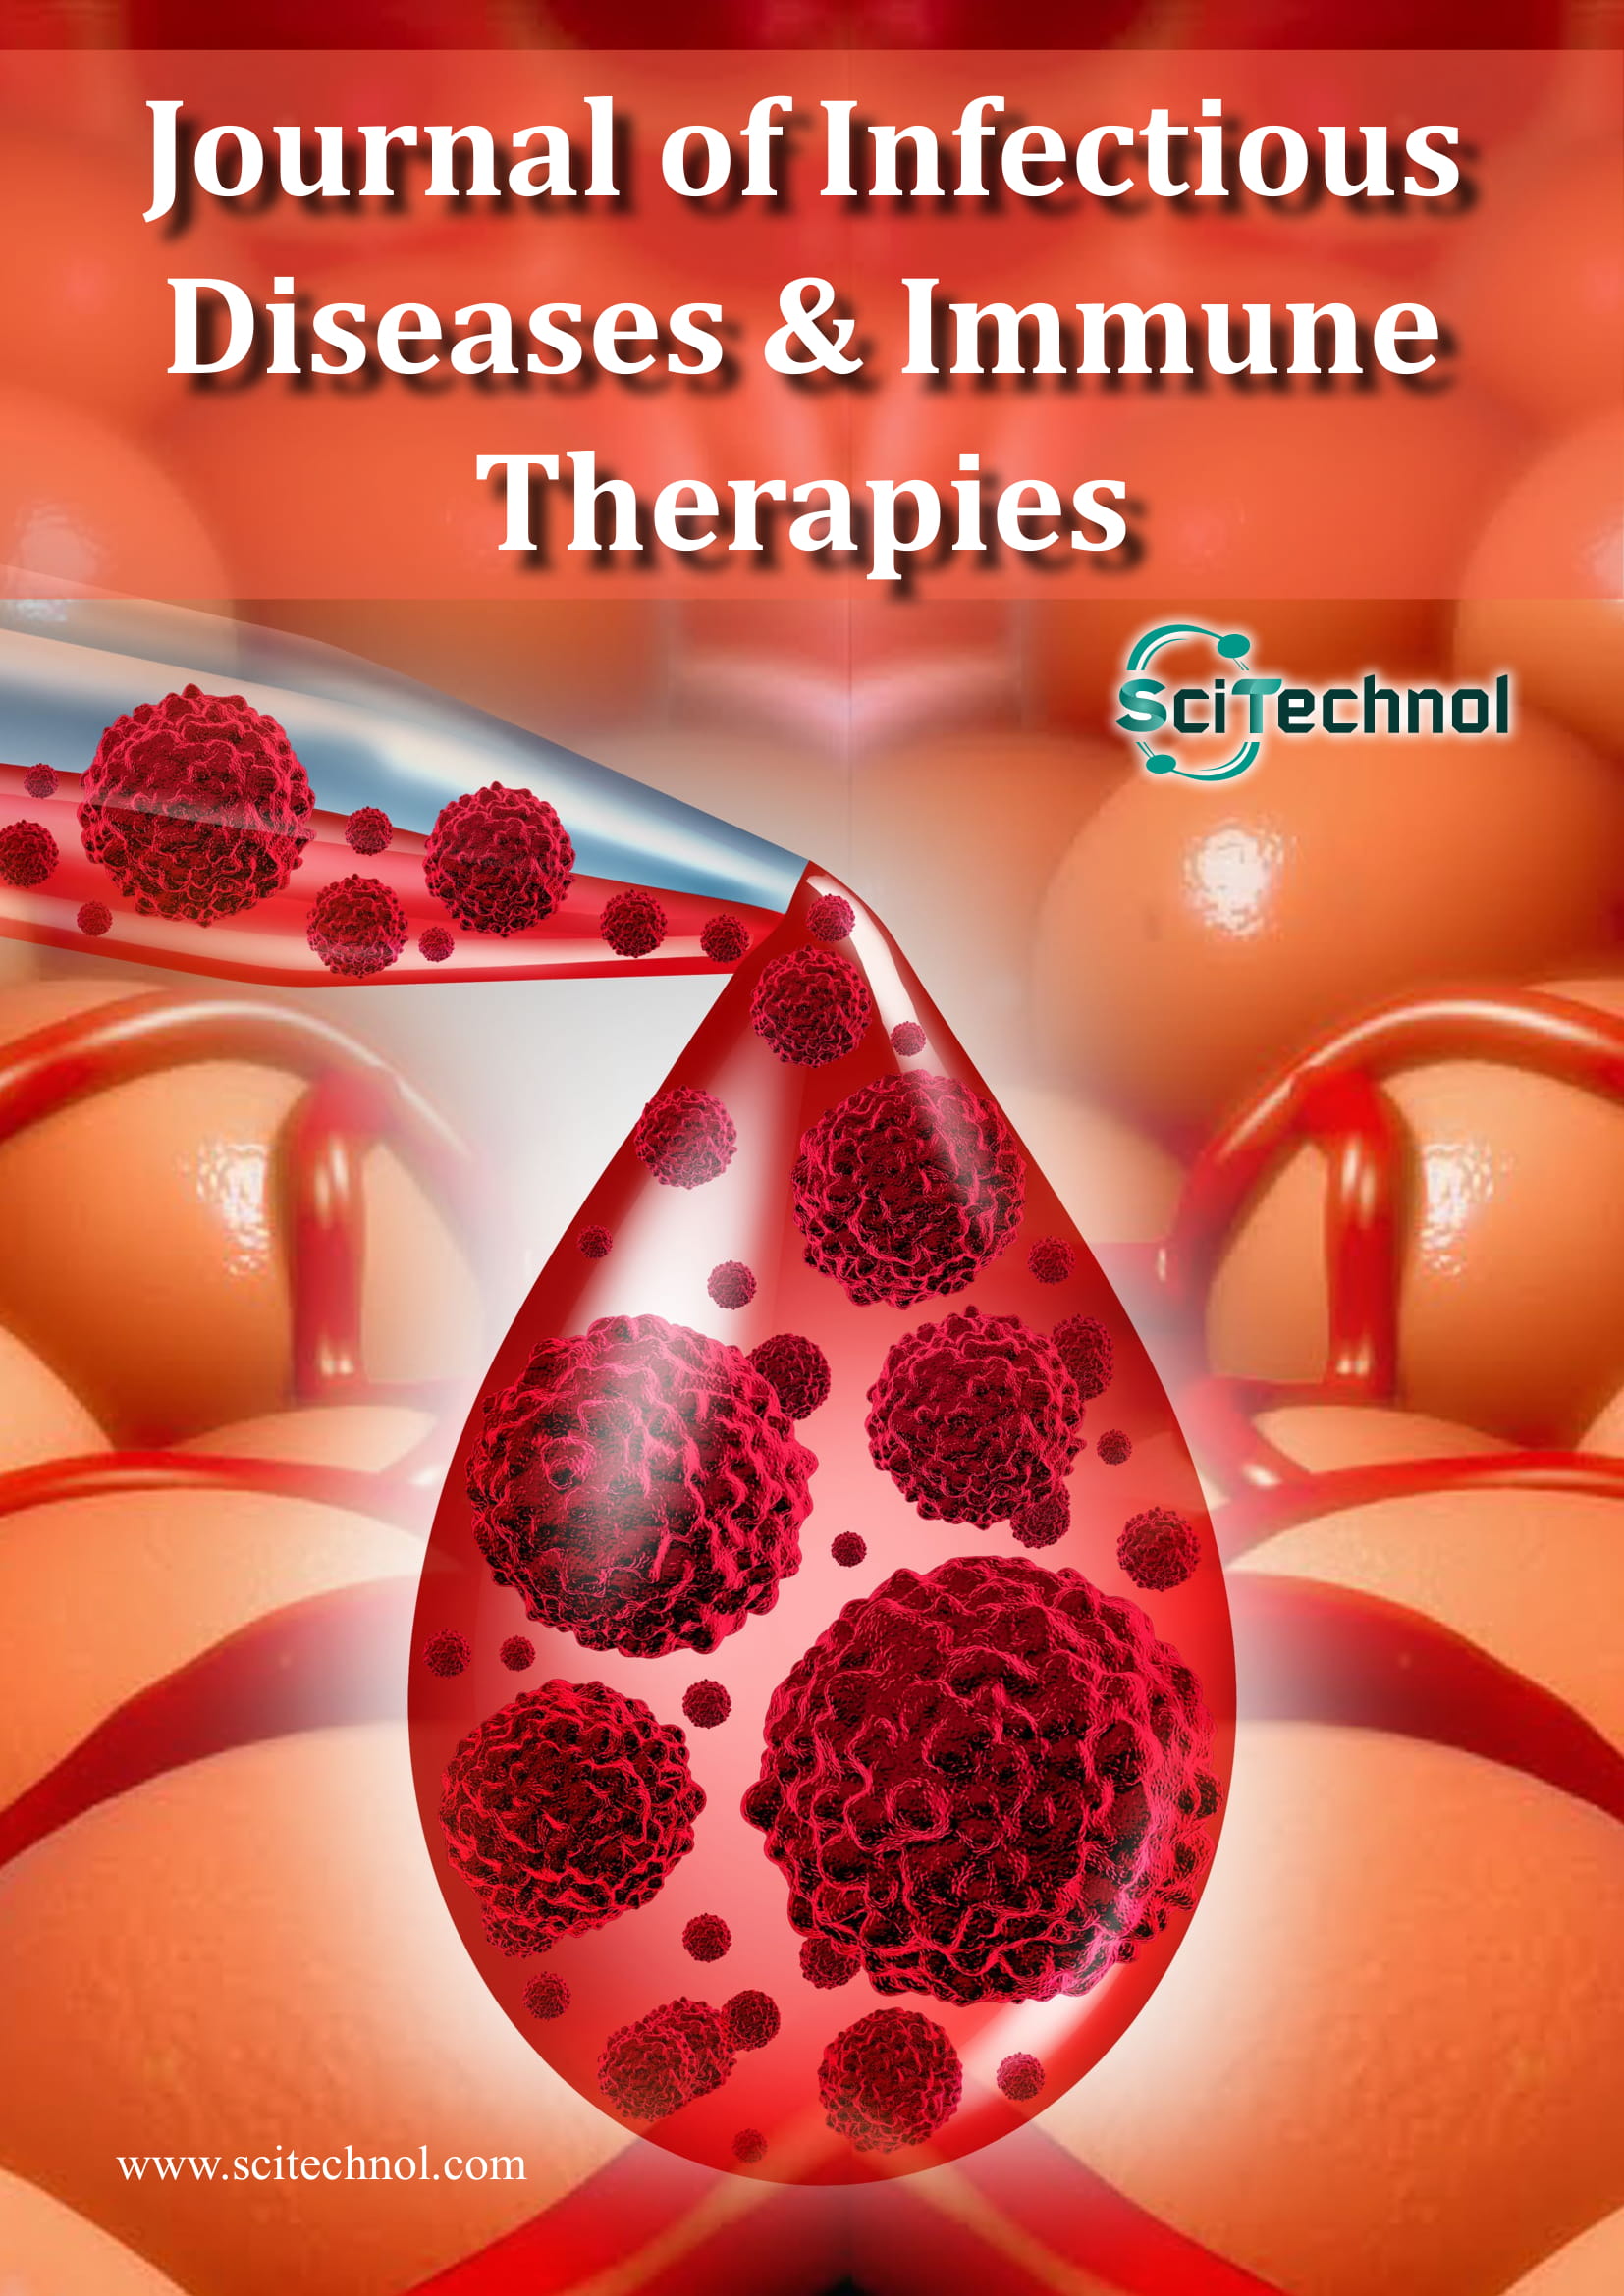 Journal-of-Infectious-Diseases-Immune-Therapies-flyer.jpg